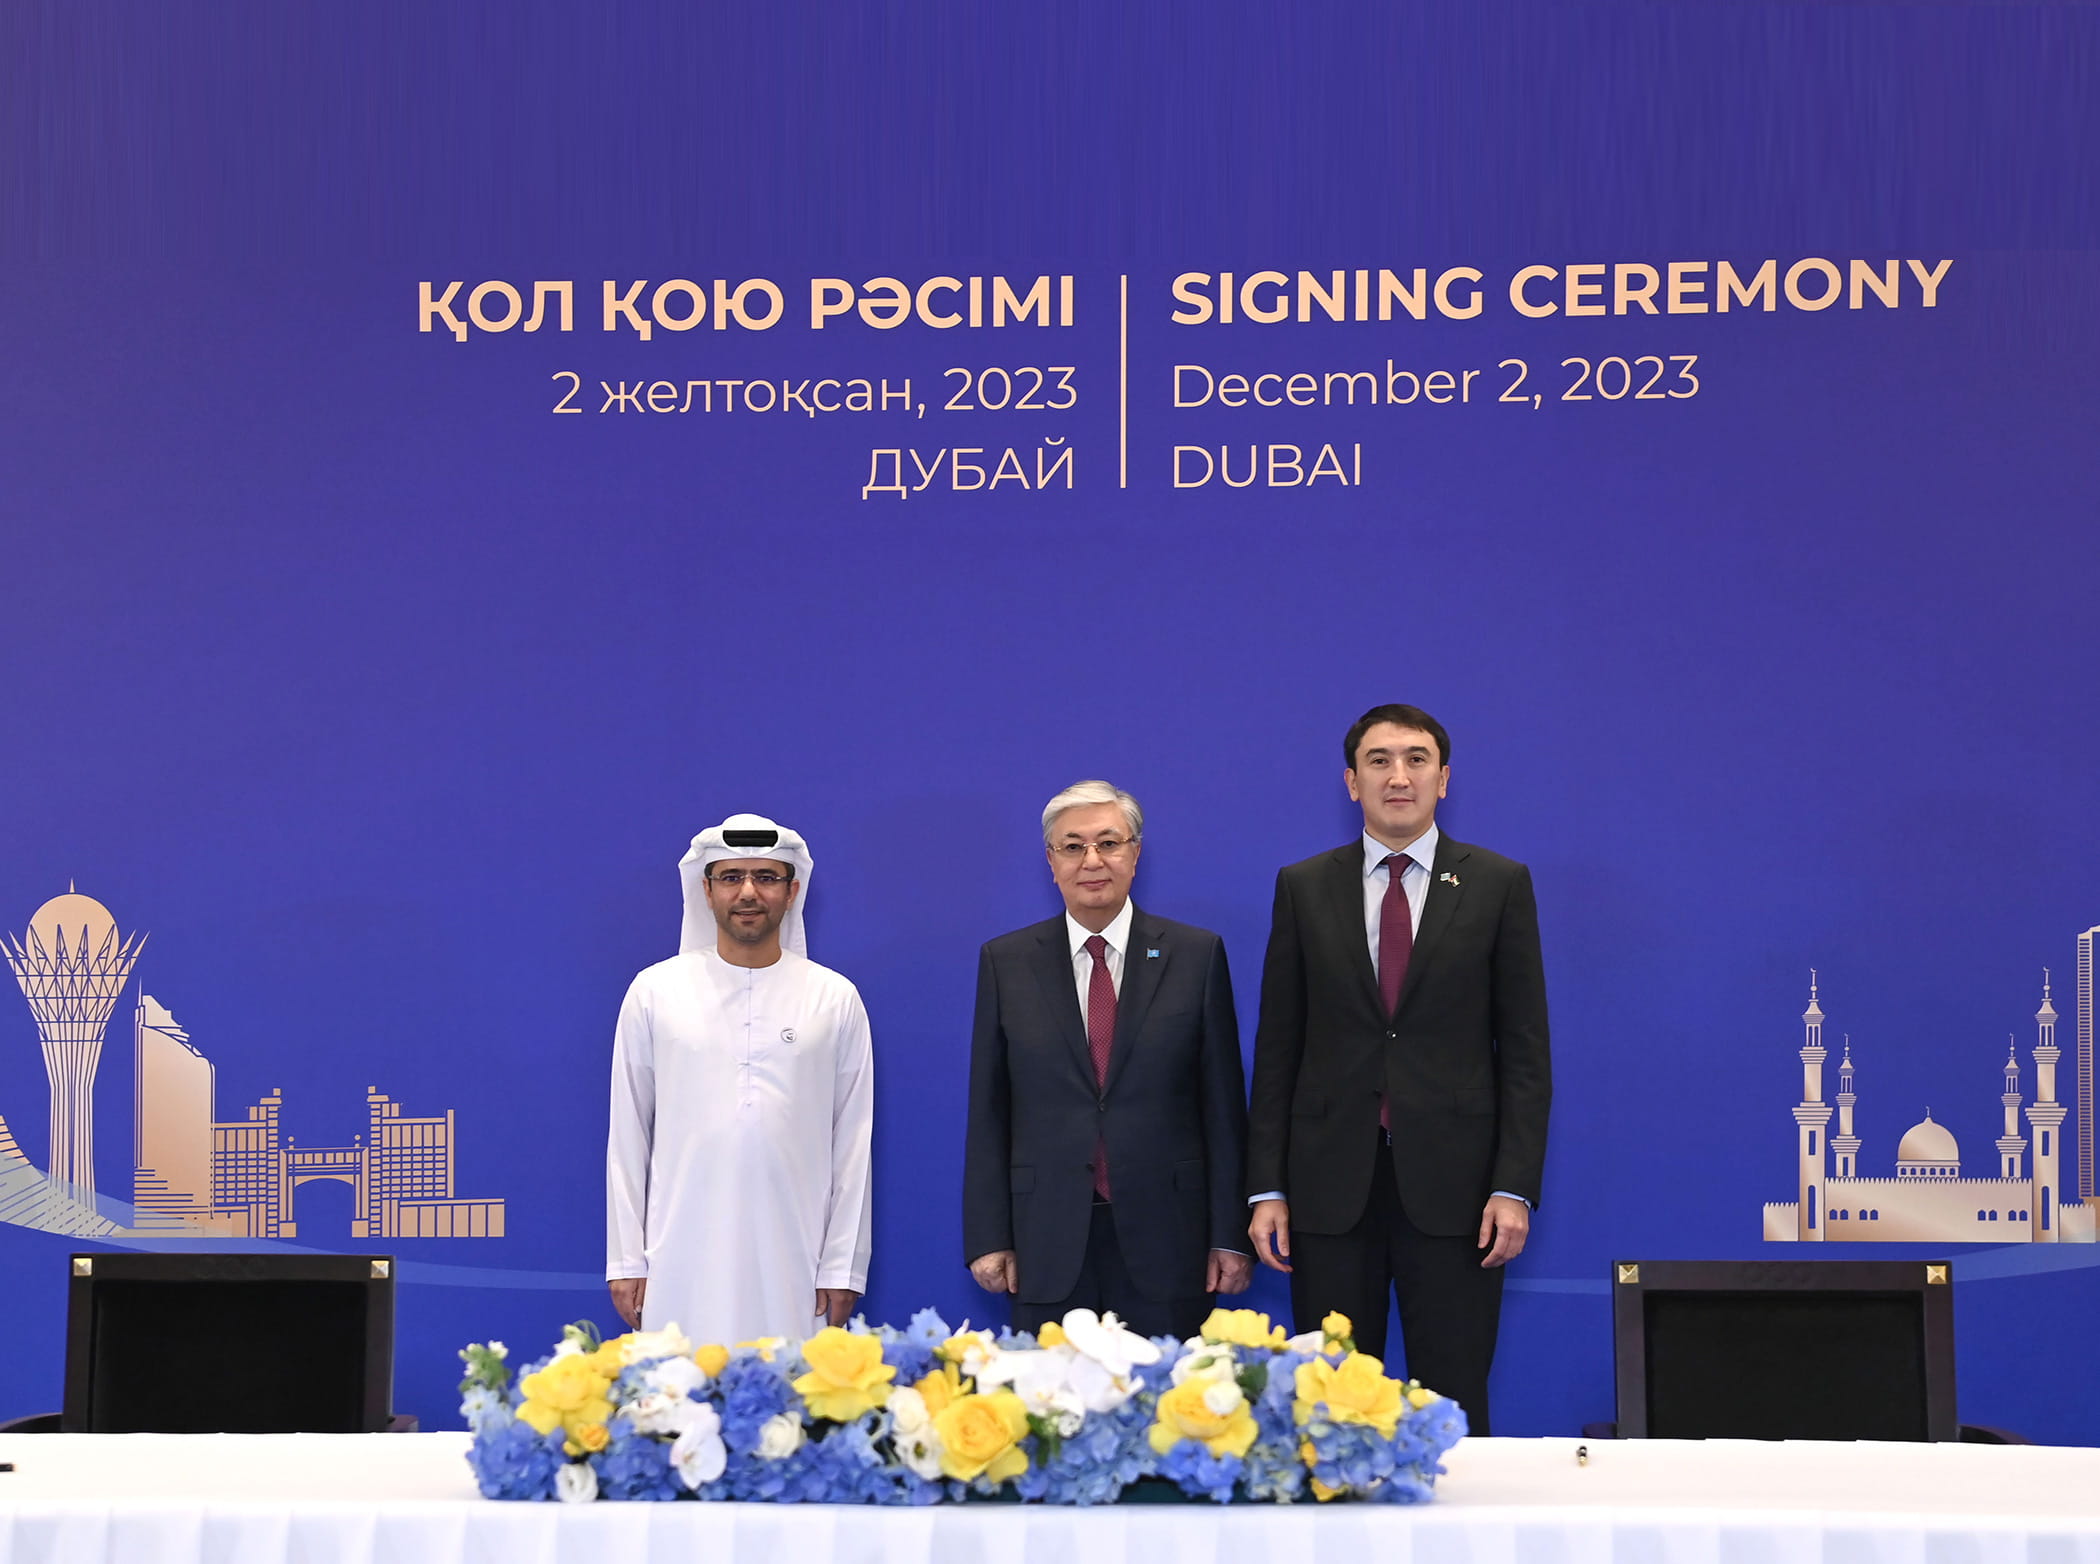 AD Ports Group and KazMunayGas Sign Heads of Terms for Ship Building and Repair Facility in Kazakhstan 